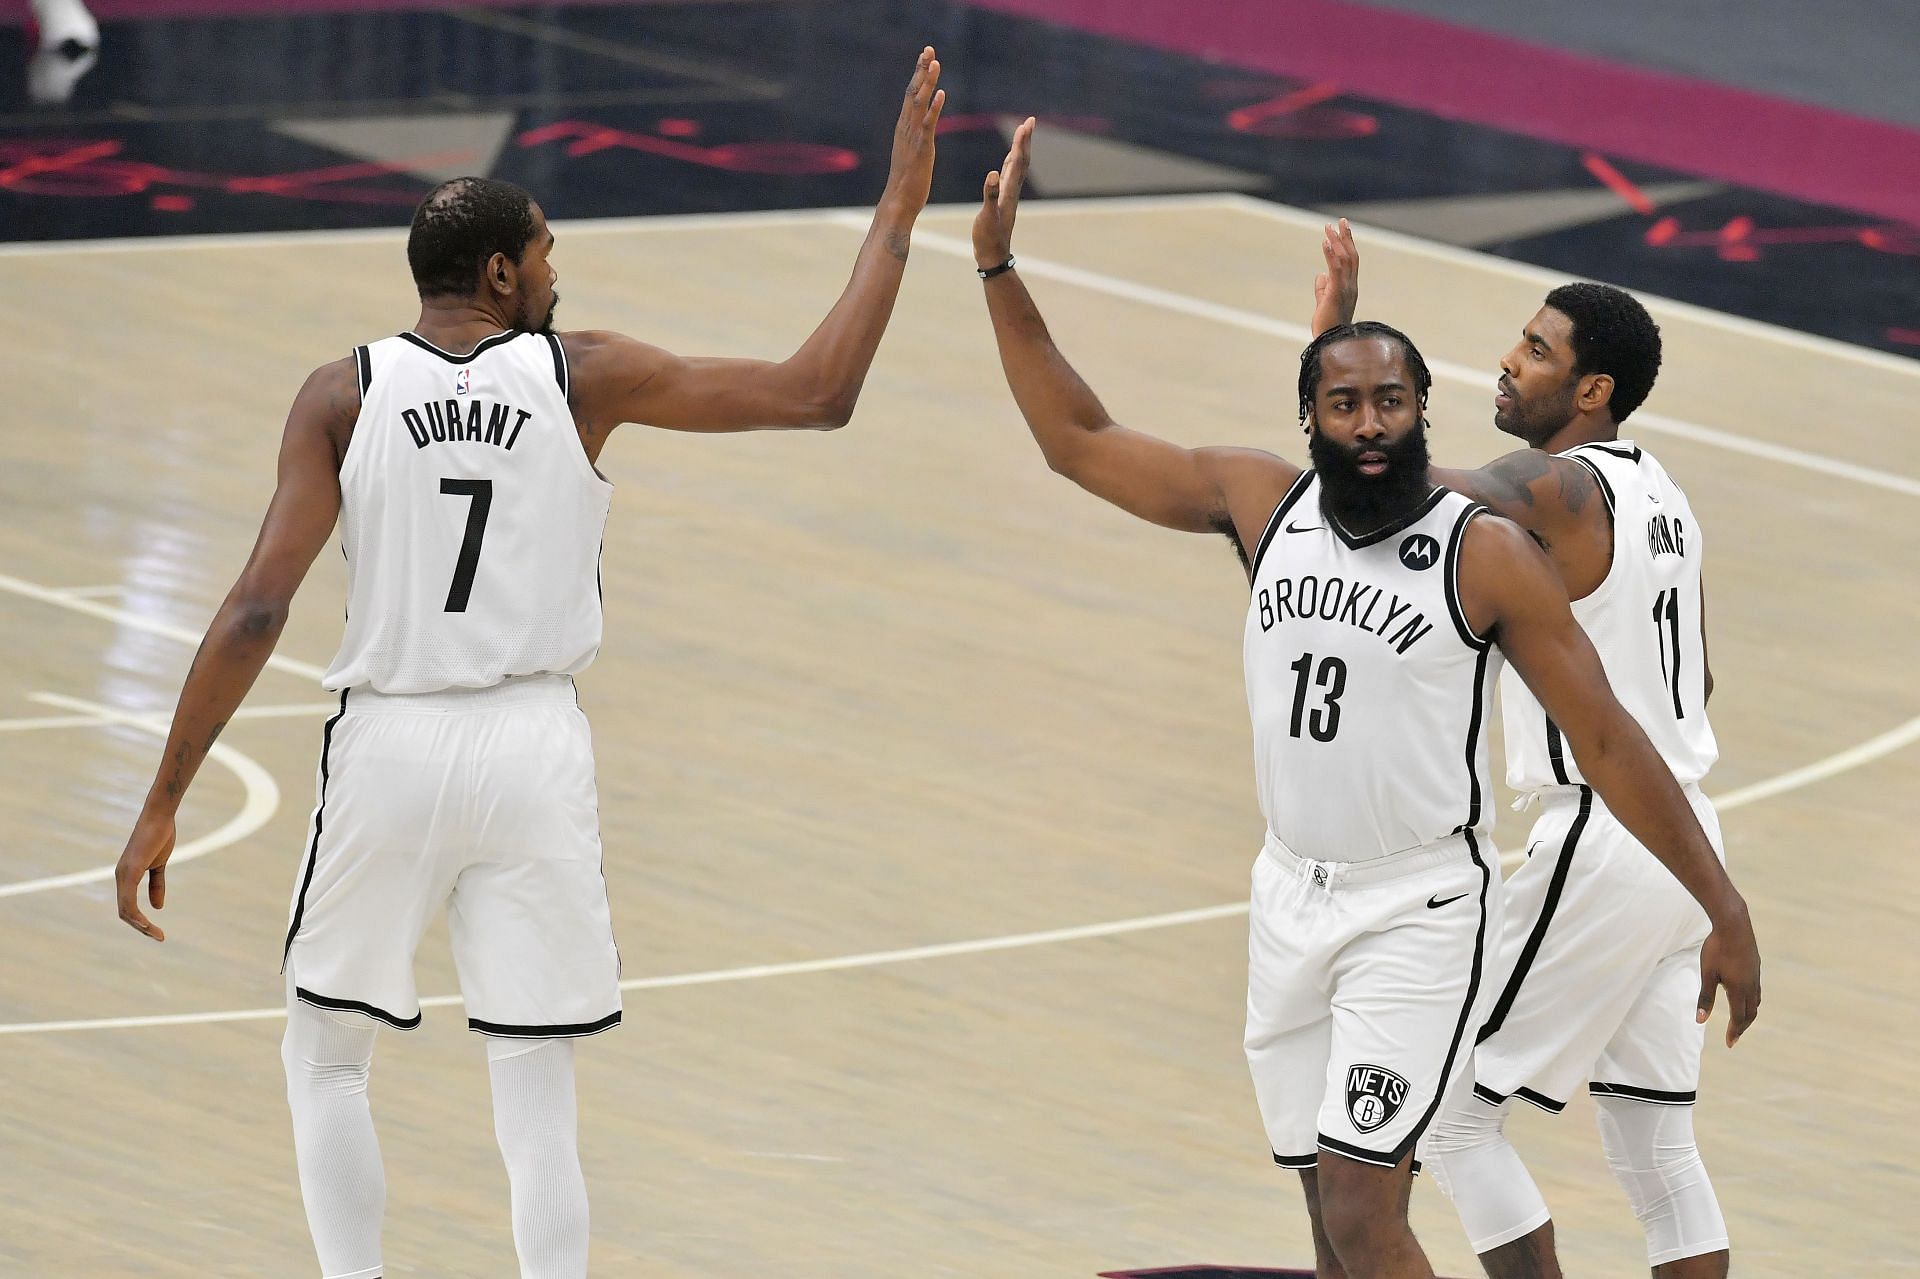 Kyrie Irving, James Harden and Kevin Durant of the Brooklyn Nets